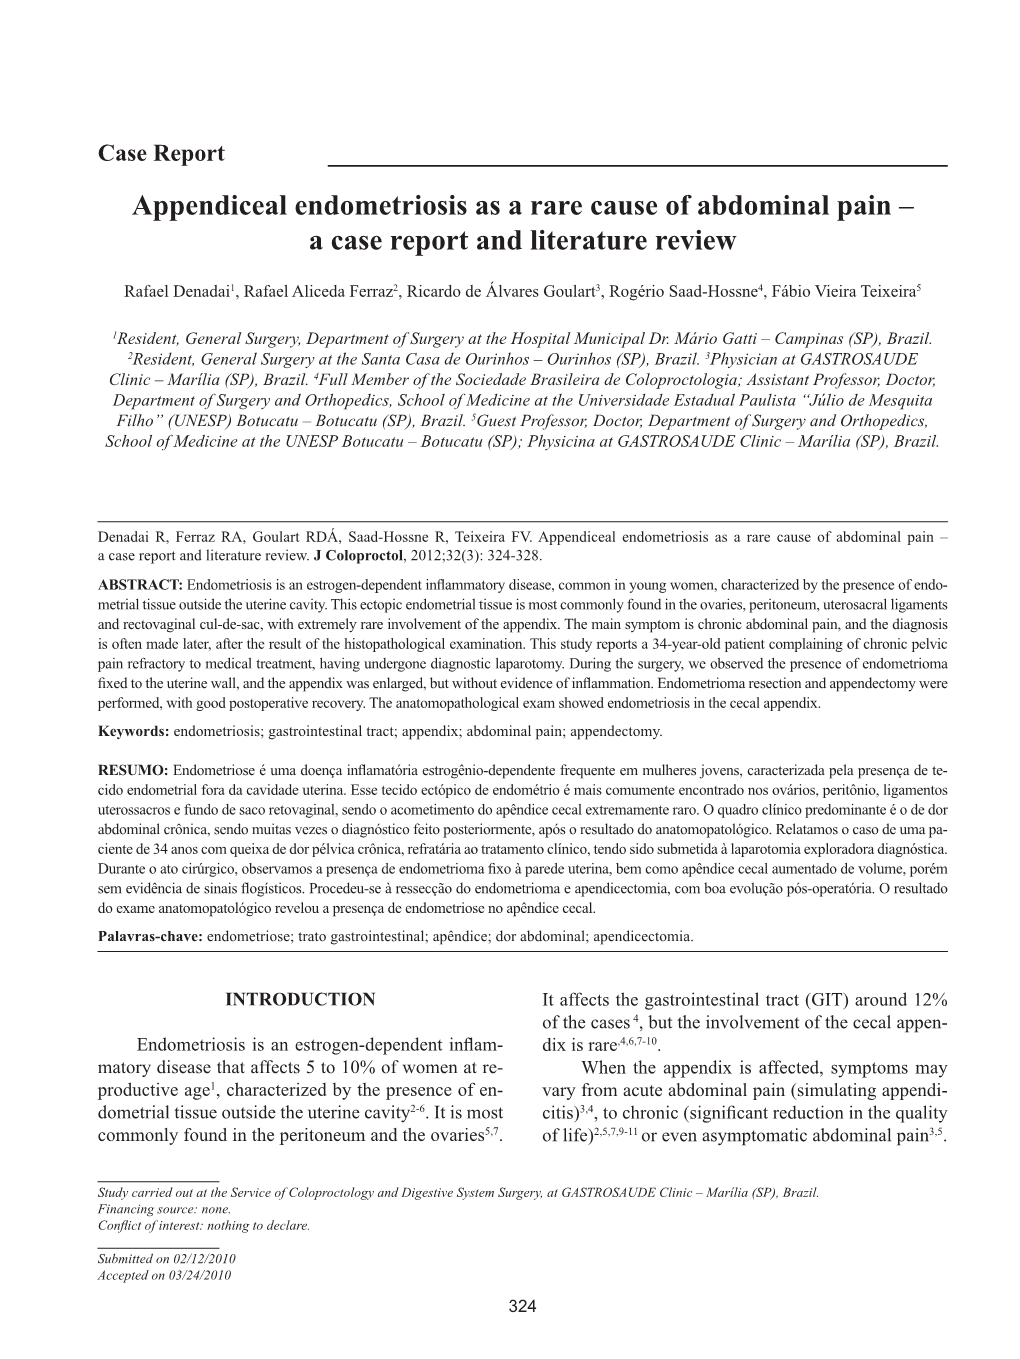 Appendiceal Endometriosis As a Rare Cause of Abdominal Pain – a Case Report and Literature Review